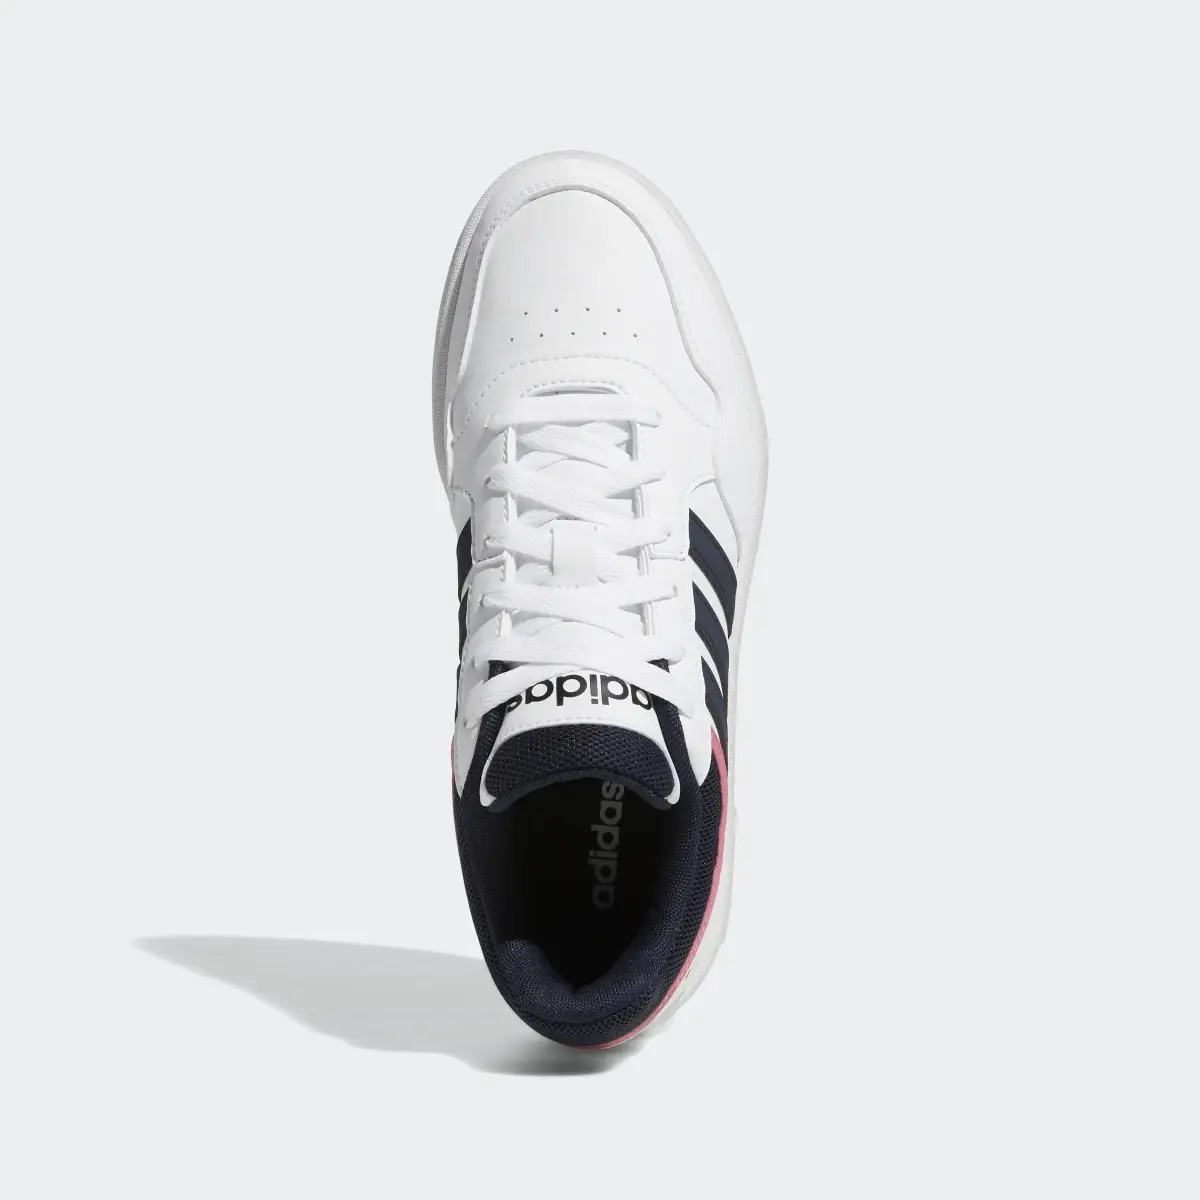 Adidas Hoops 3.0 Low Classic Schuh. 3